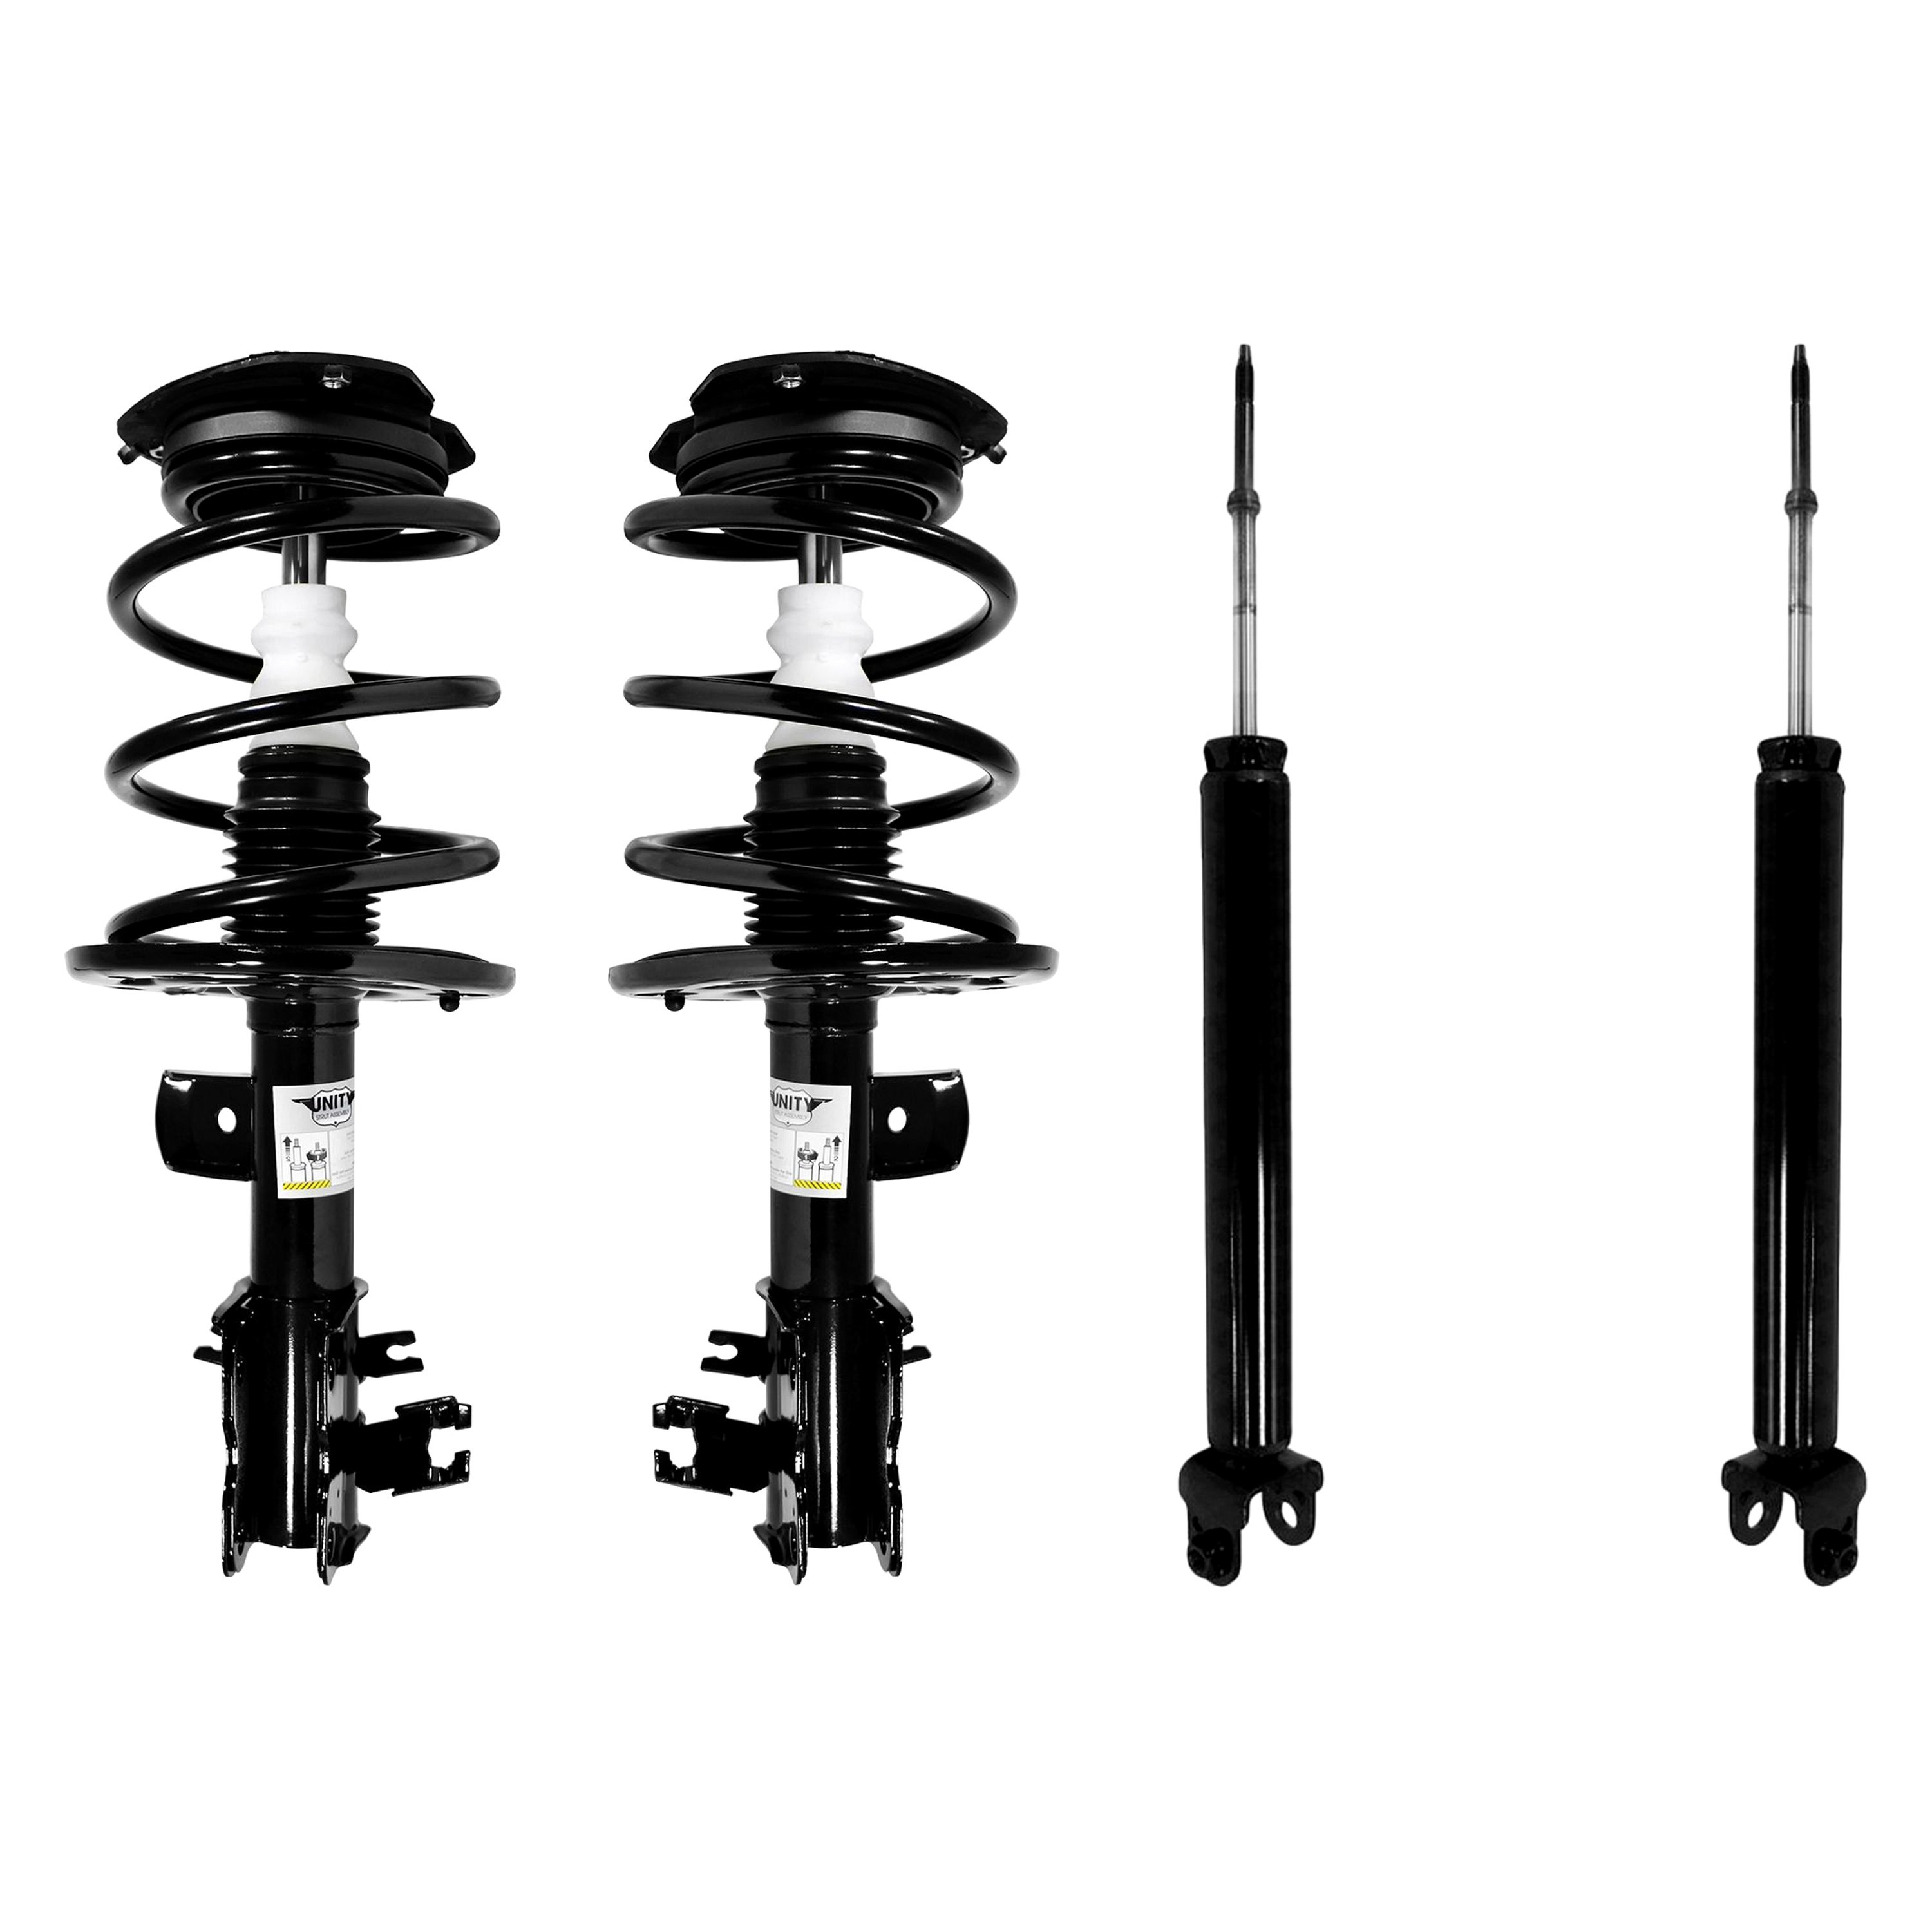 MILLION PARTS Front Pair Shock Struts Absorbers Left Right Side fit for Nissan Altima 2007 2008 2009 2010 2011 2012 2013